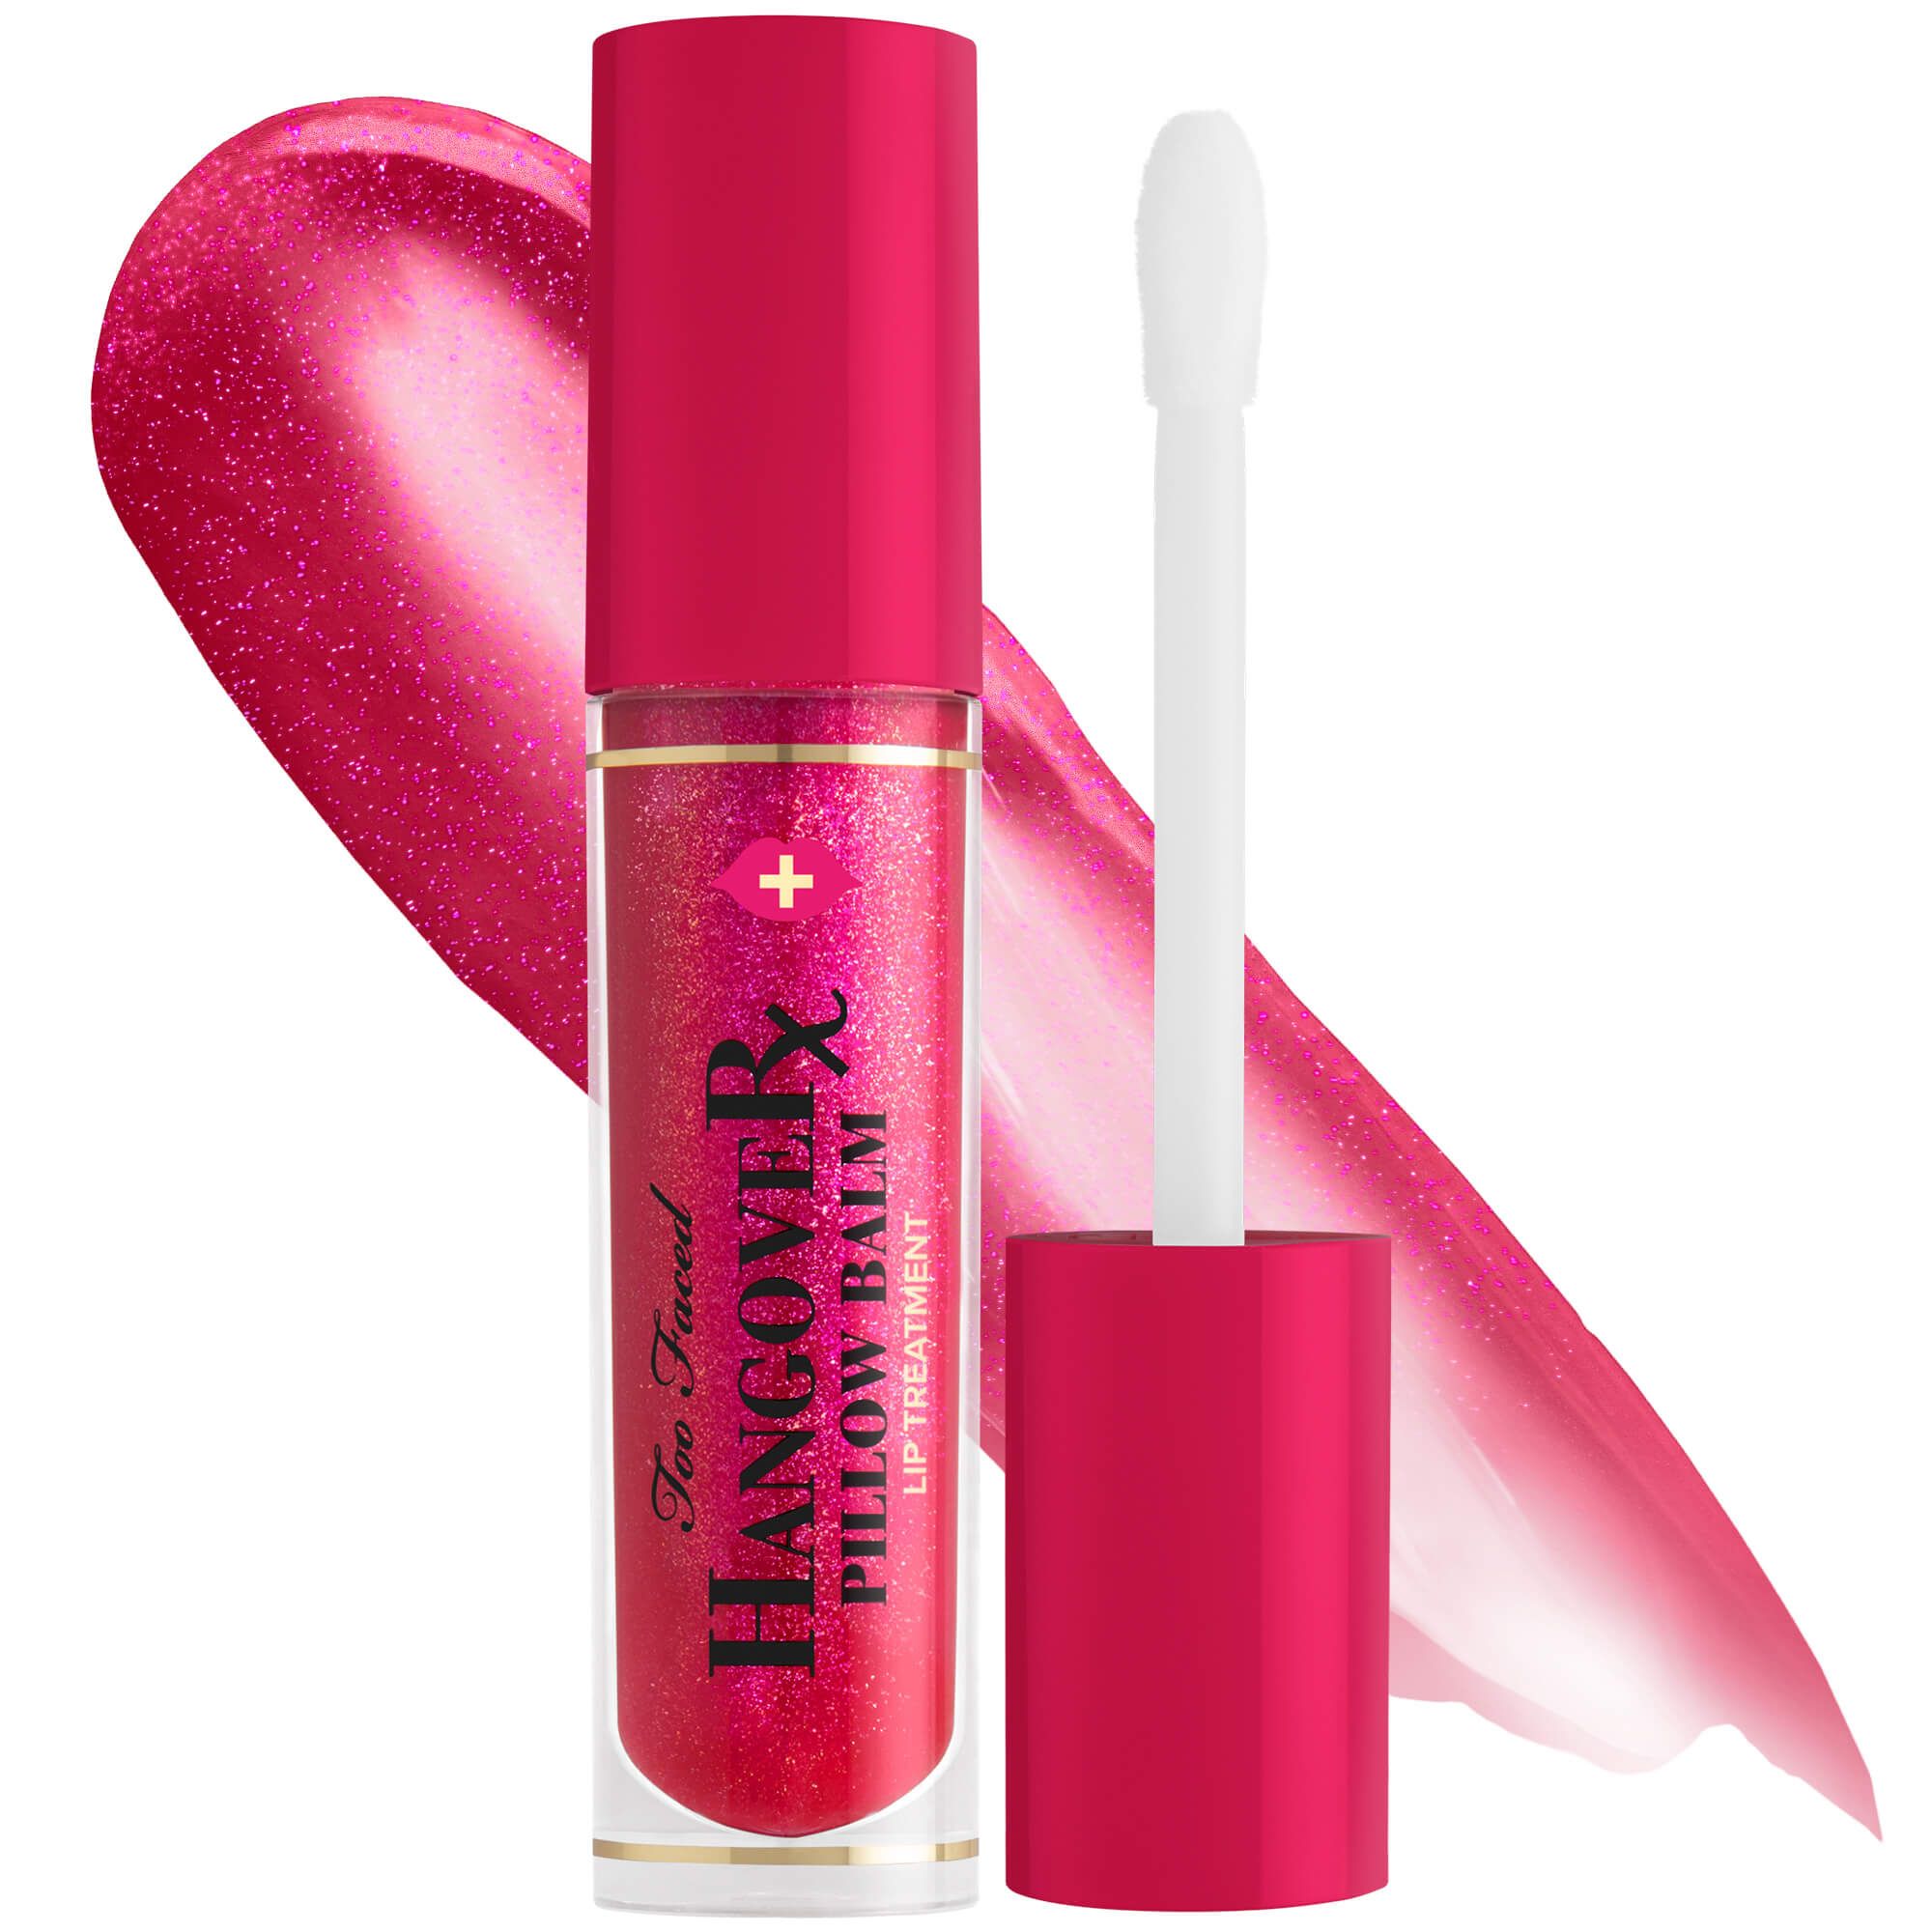 Hangover Pillow Balm Ultra-Hydrating Lip Balm | Too Faced | Too Faced US